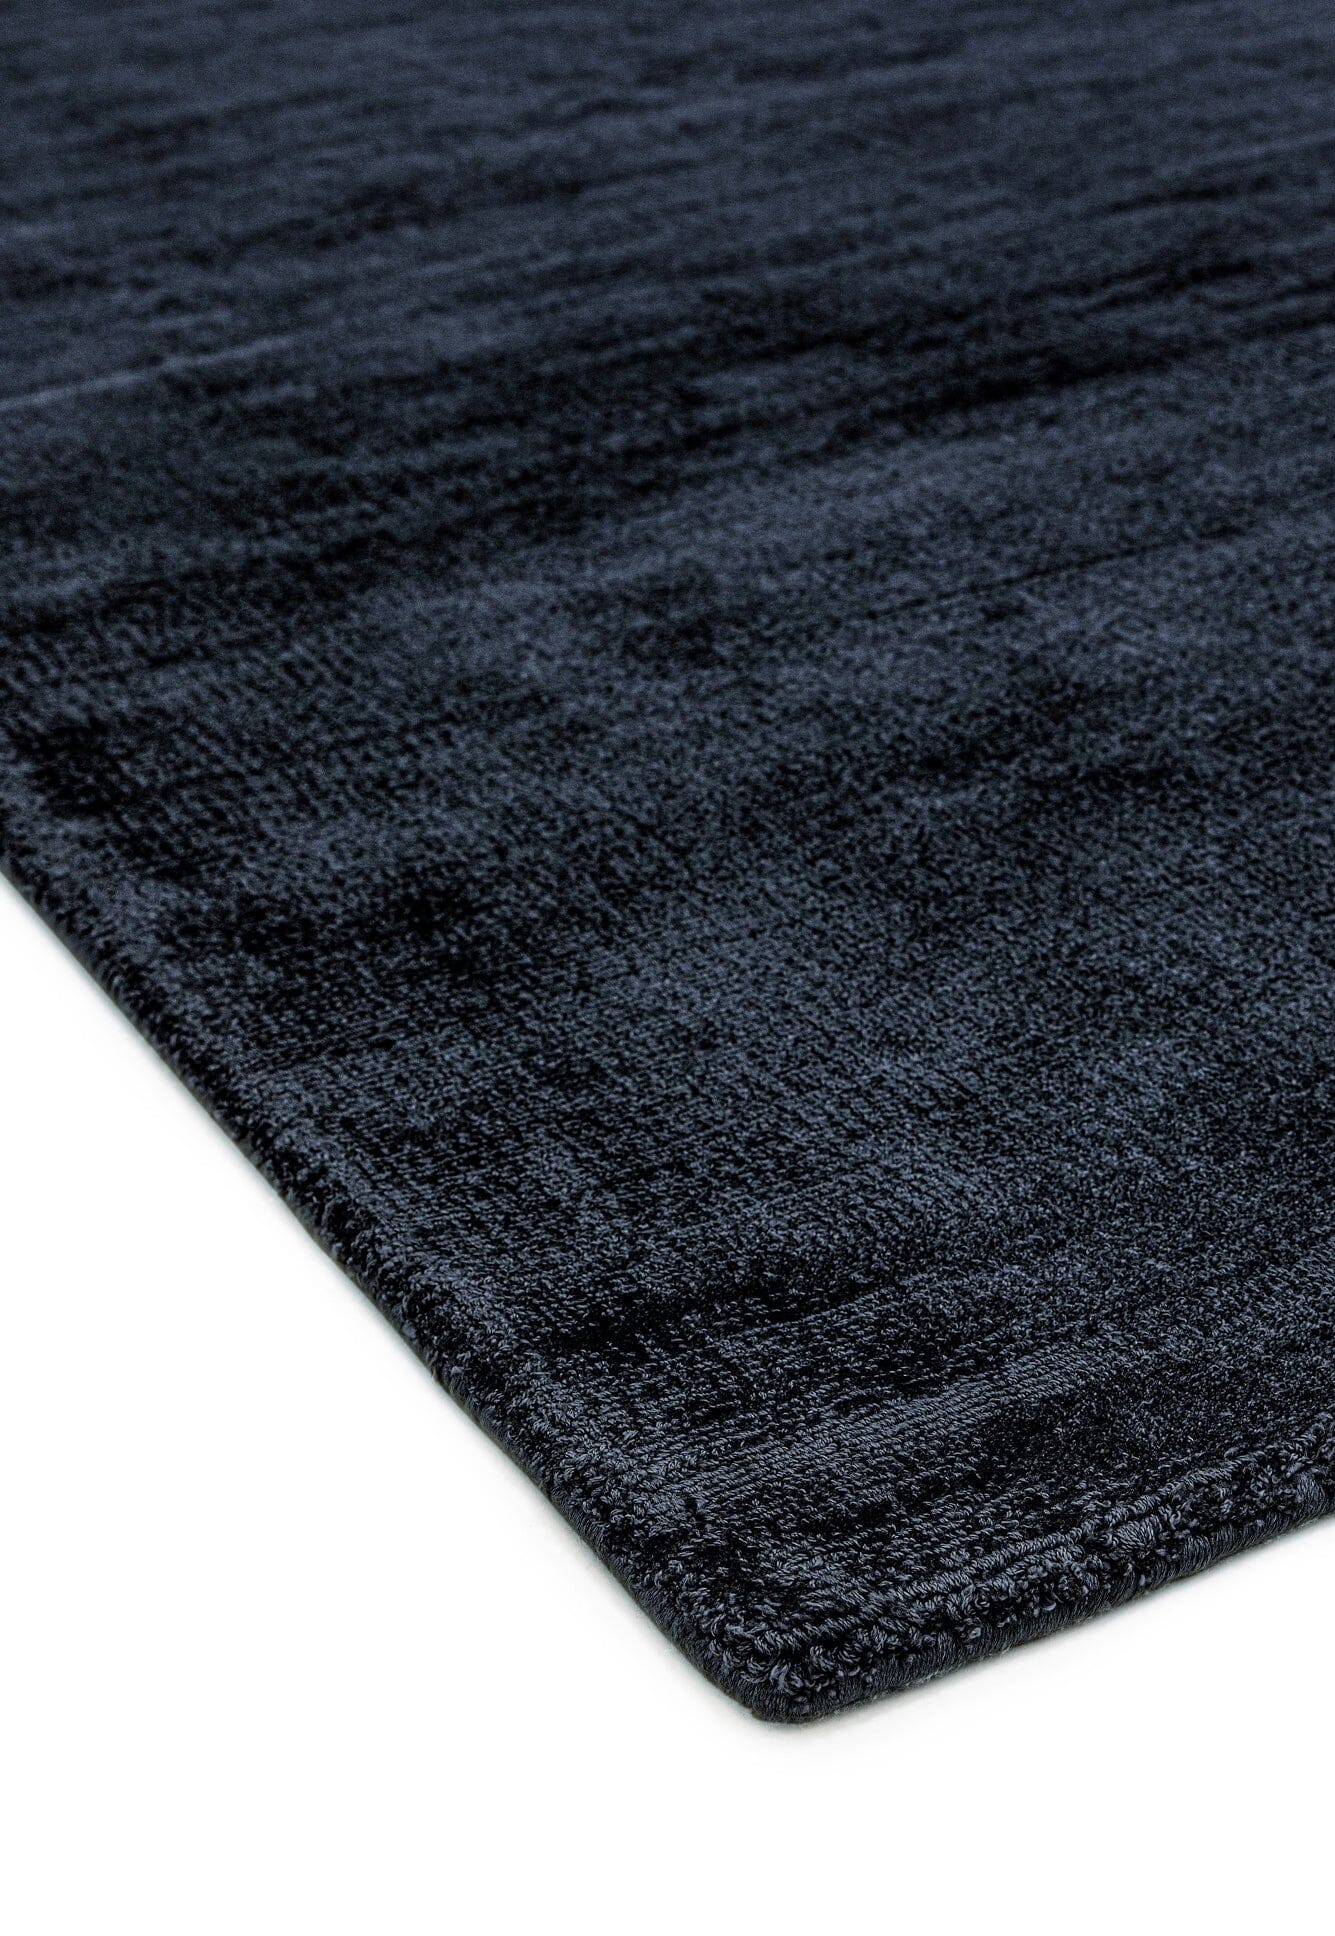  Asiatic Carpets-Asiatic Carpets Blade Hand Woven Rug Navy - 200 x 290cm-Blue 021 